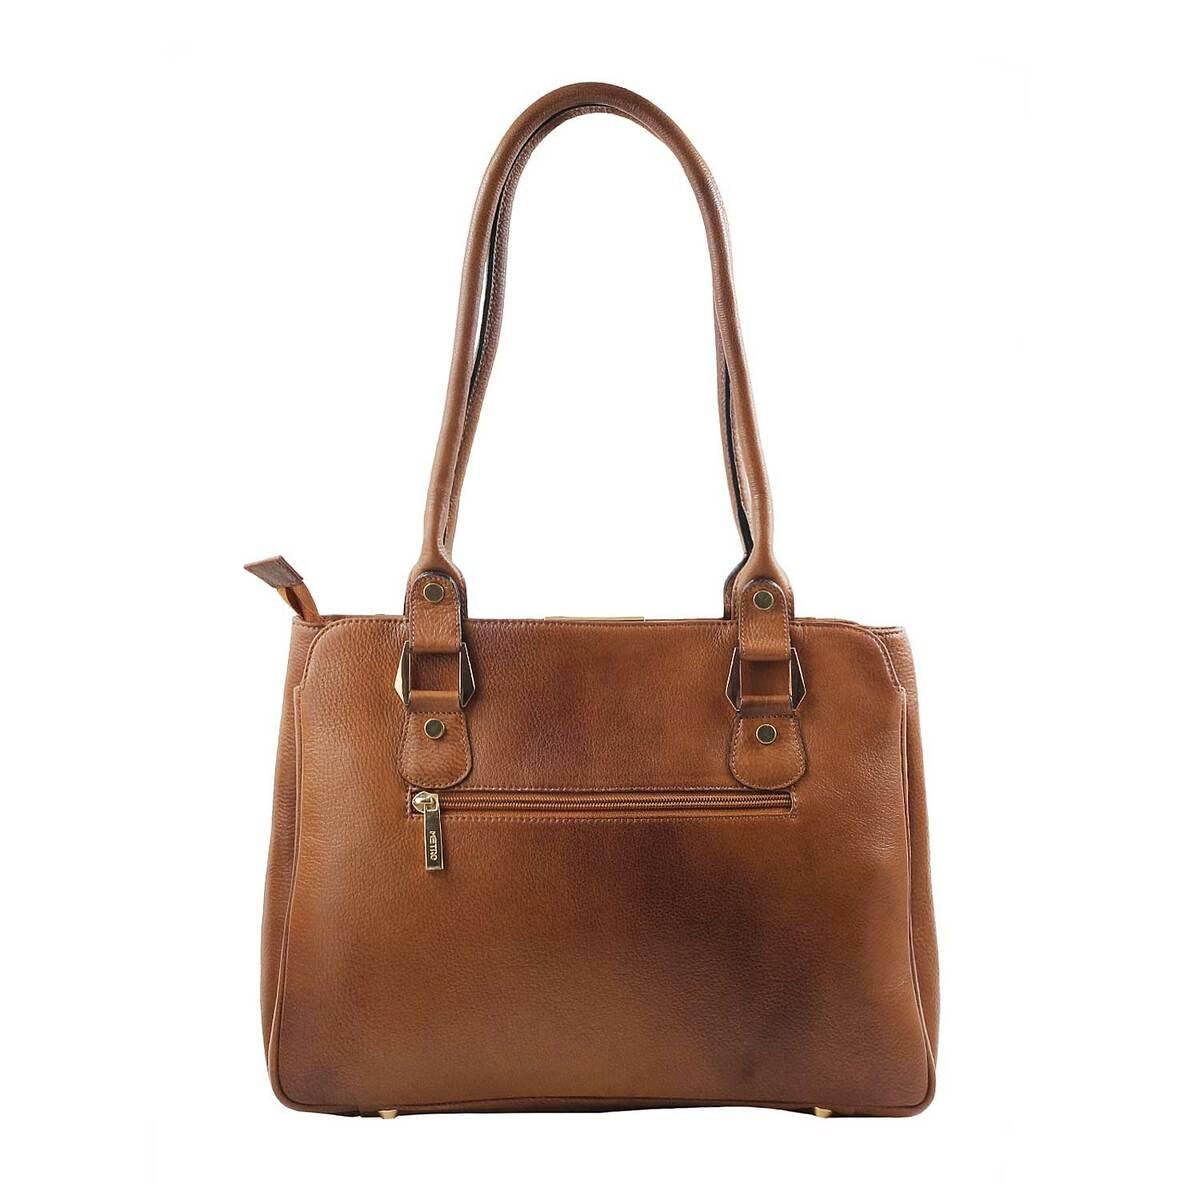 Buy Moochies Ladies Genuine Leather Purse-Tan(New) at Amazon.in